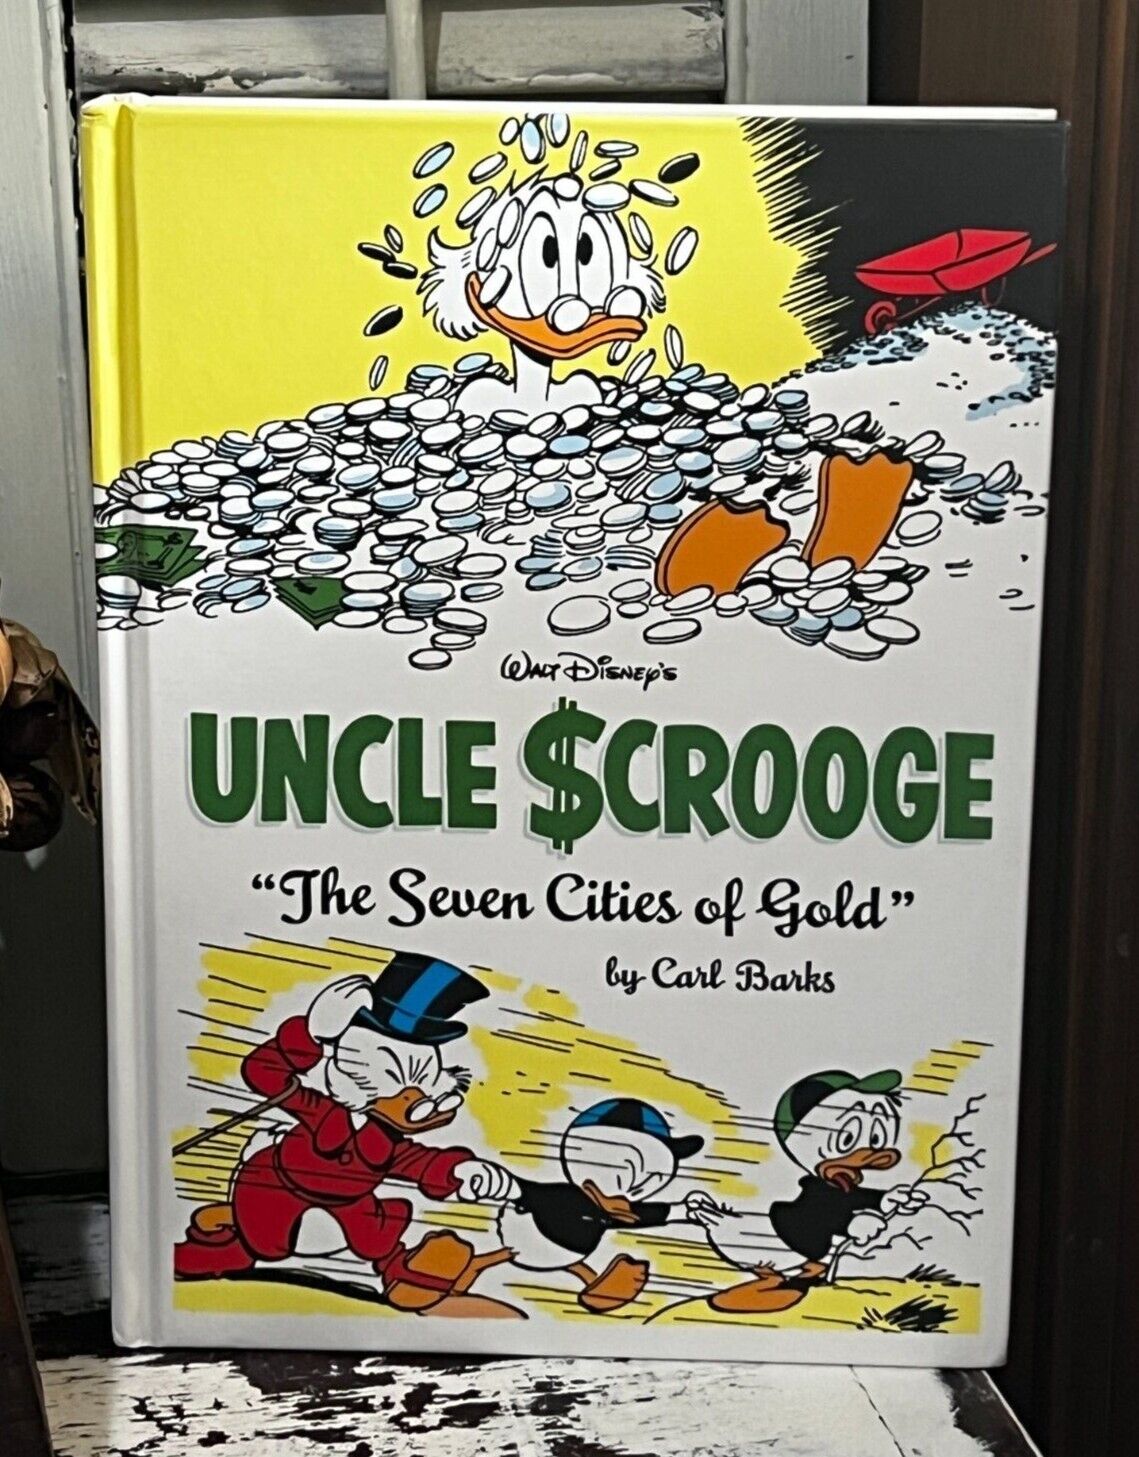 Walt Disney's Uncle Scrooge "The Seven Cities of Gold" 2014 1st ed by Carl Barks